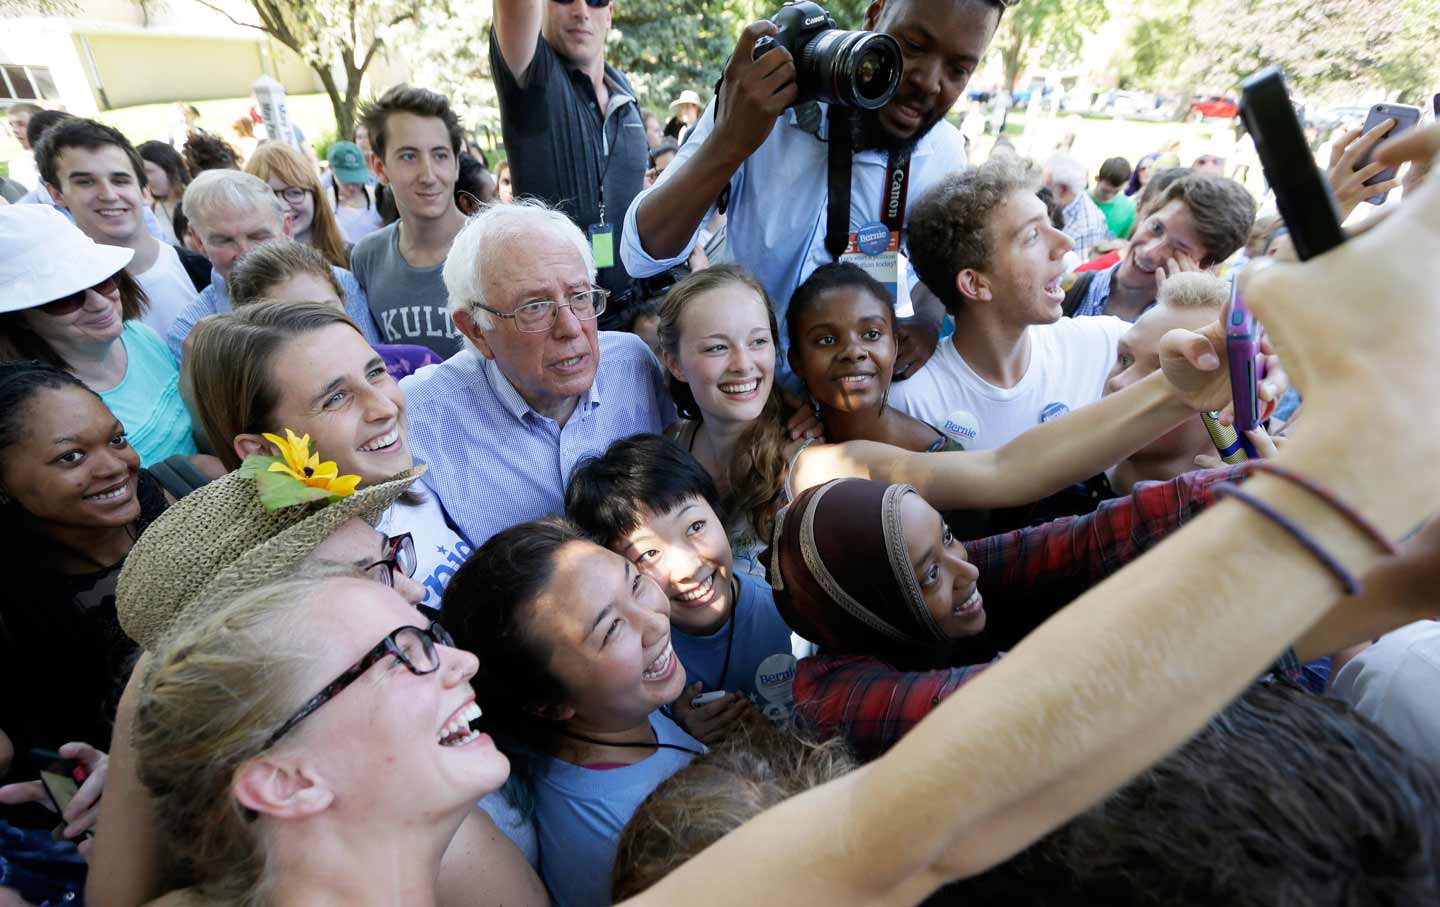 Democratic presidential candidate Bernie Sanders and supporters